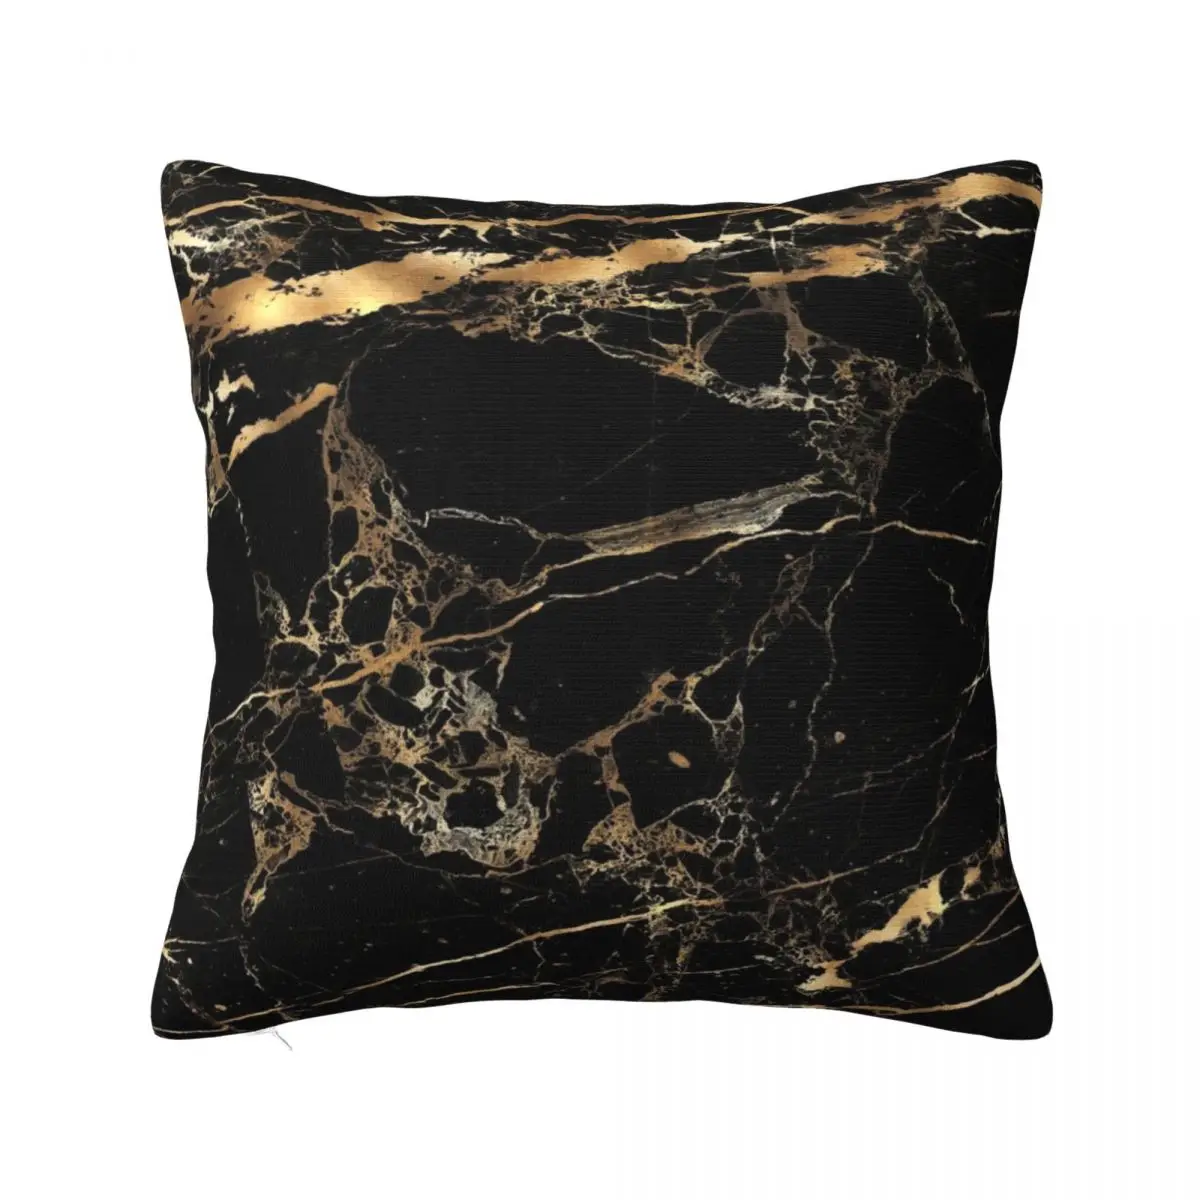 

Black Marble Gold Veins Throw Pillow Luxury Living Room Decorative Cushions home decor items Cusions Cover